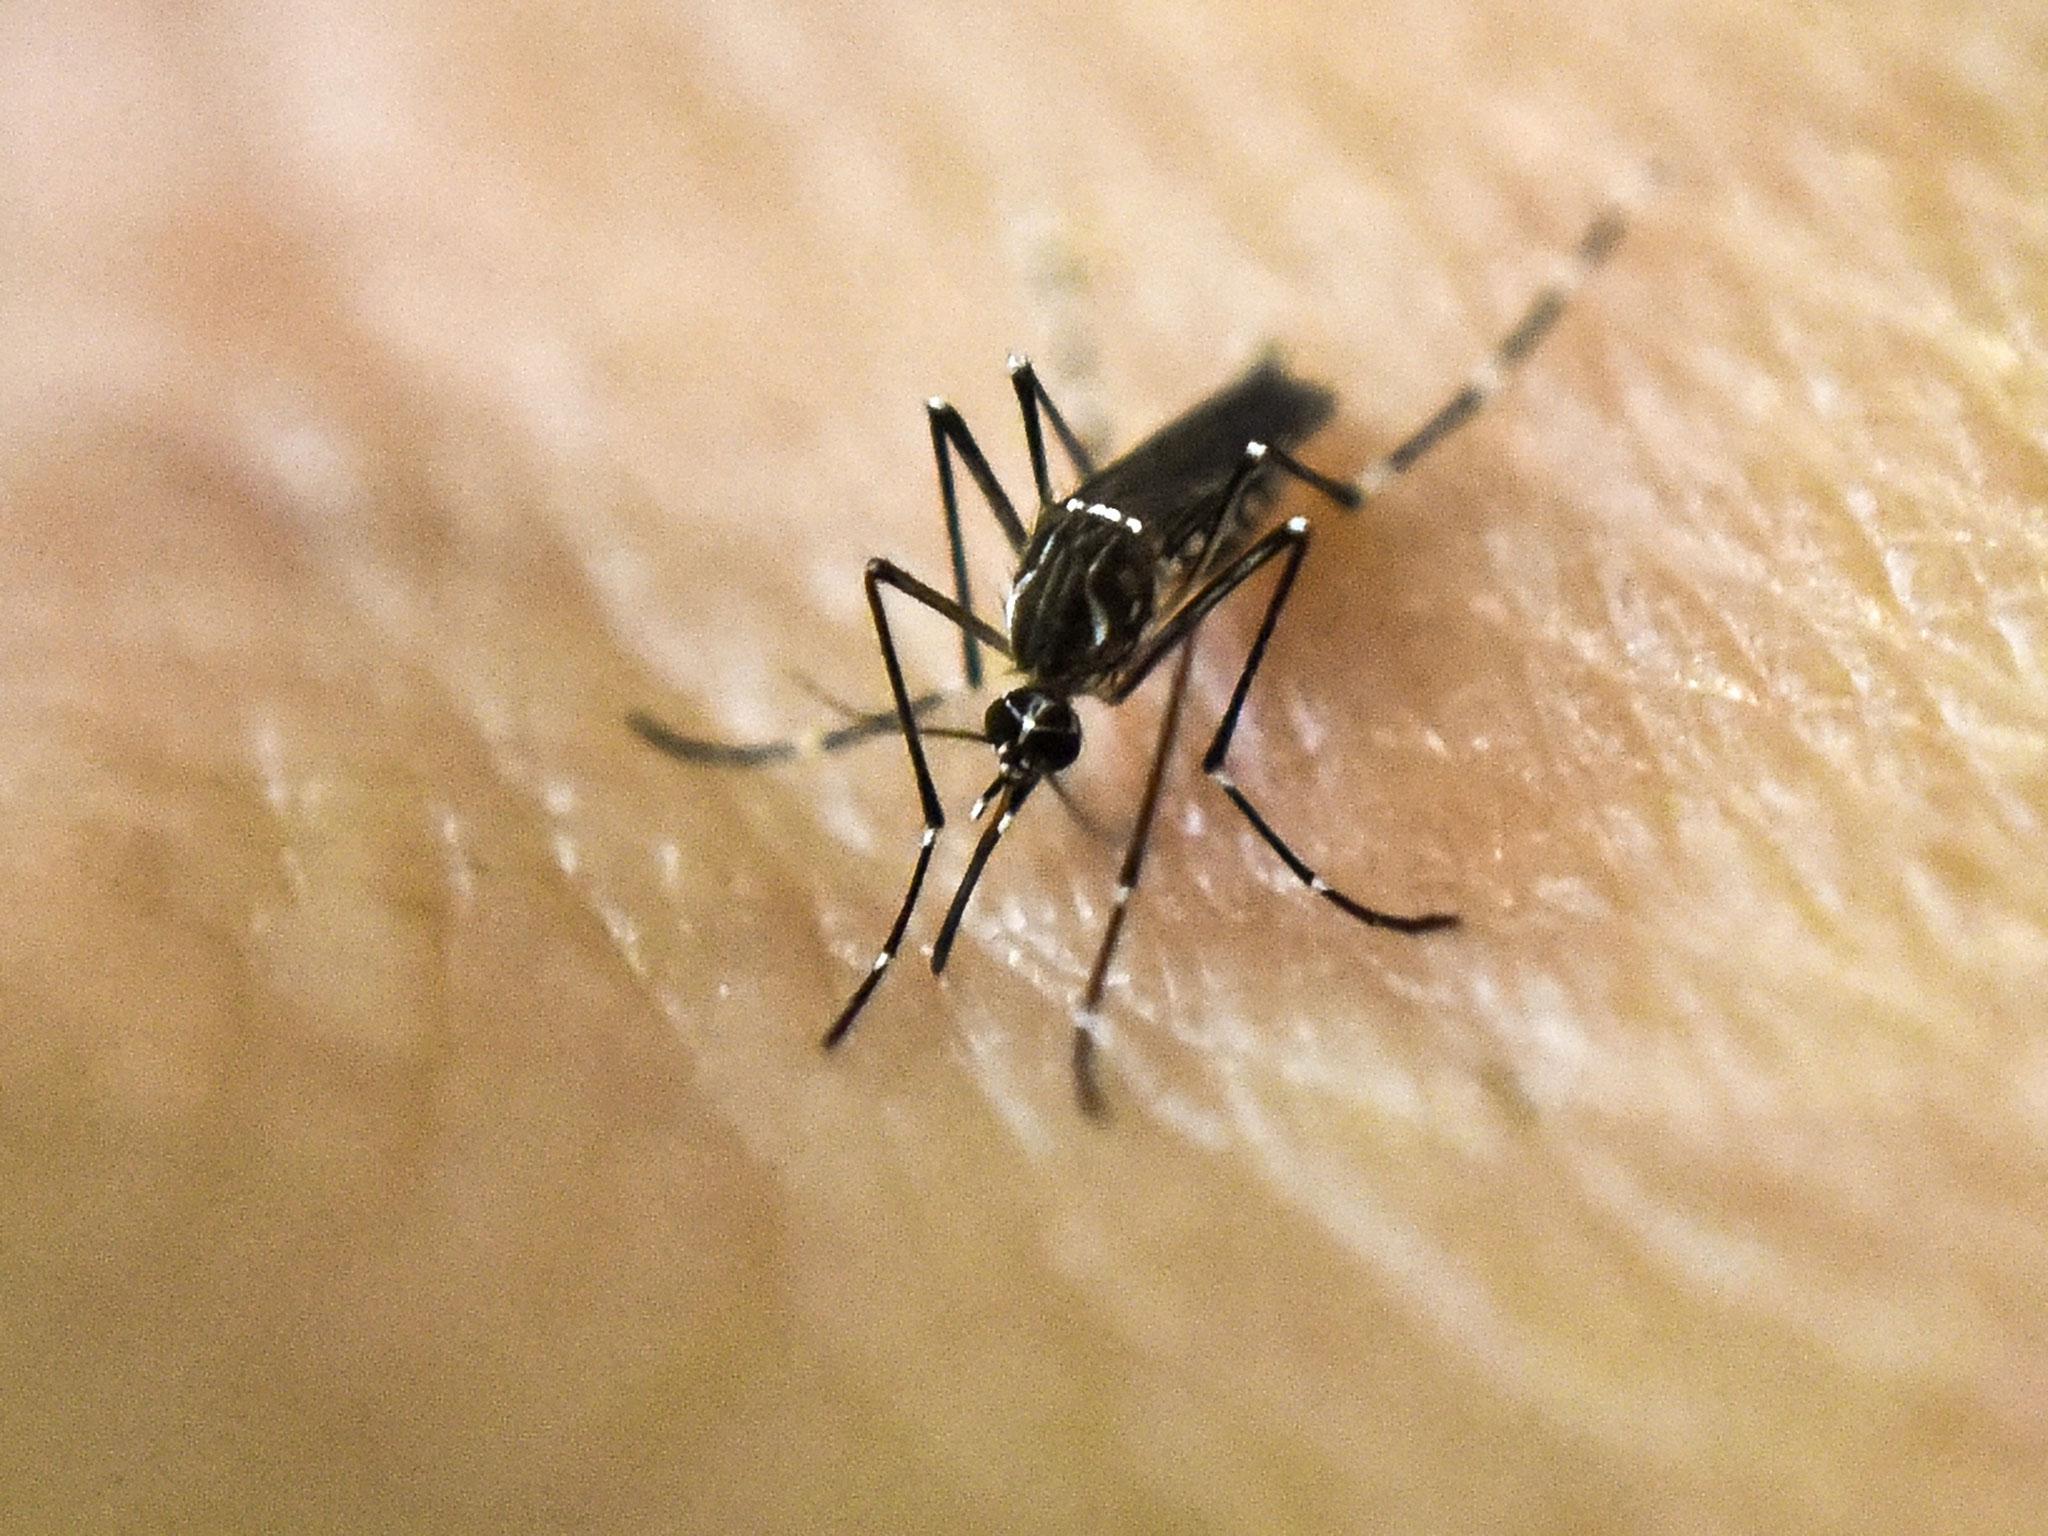 It is not known if Zika was the sole cause of the person's death